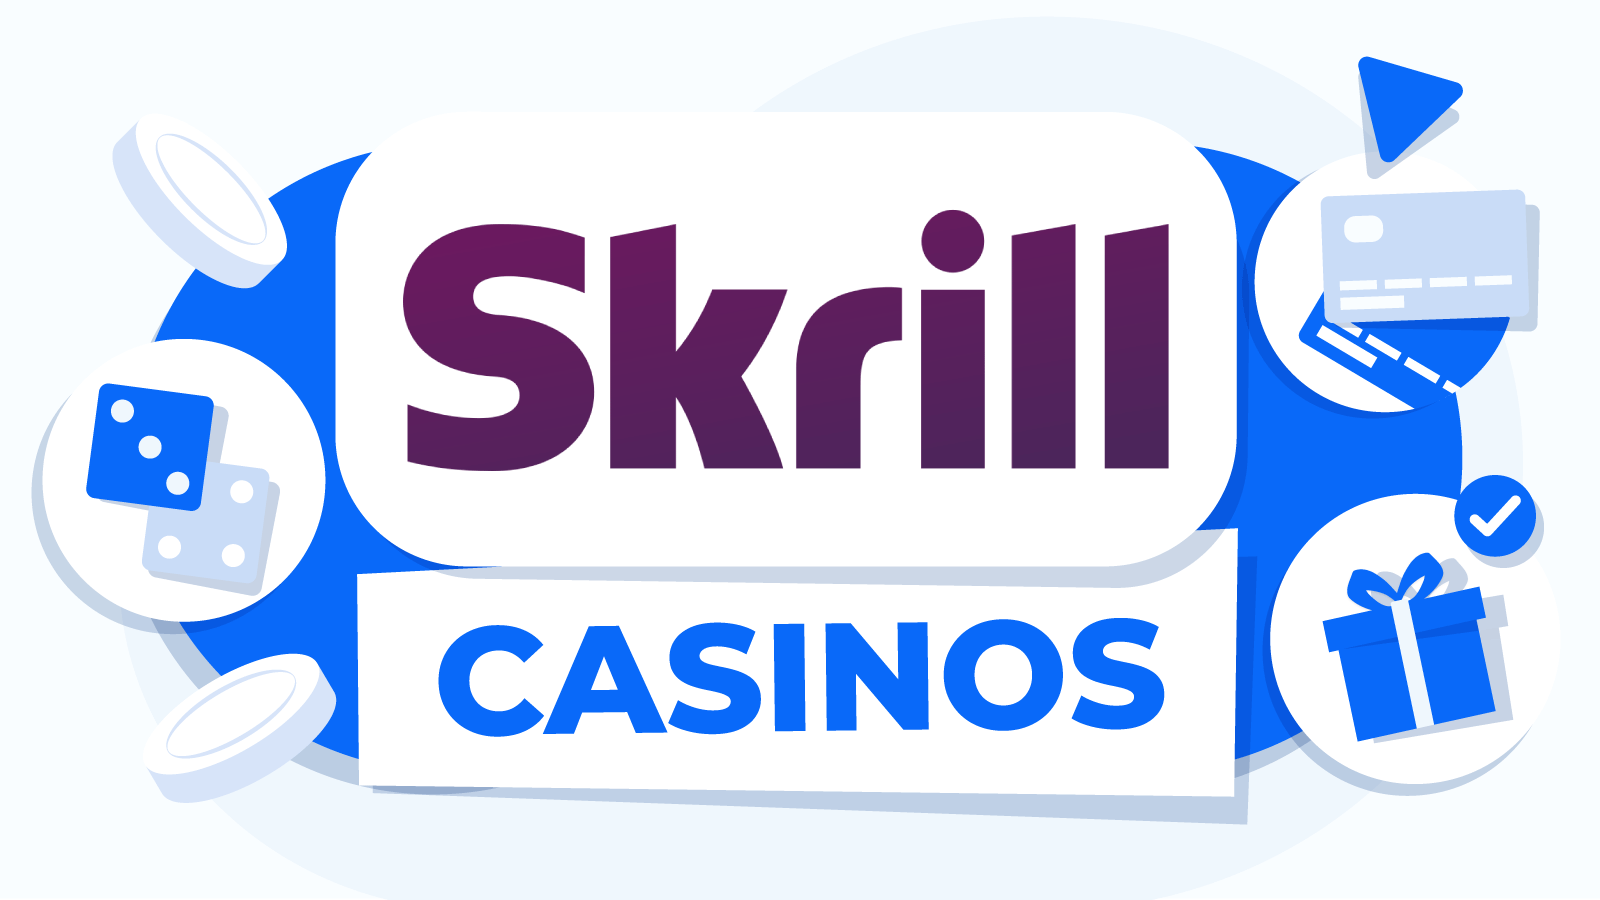 Best Skrill Casinos Available in New Zealand